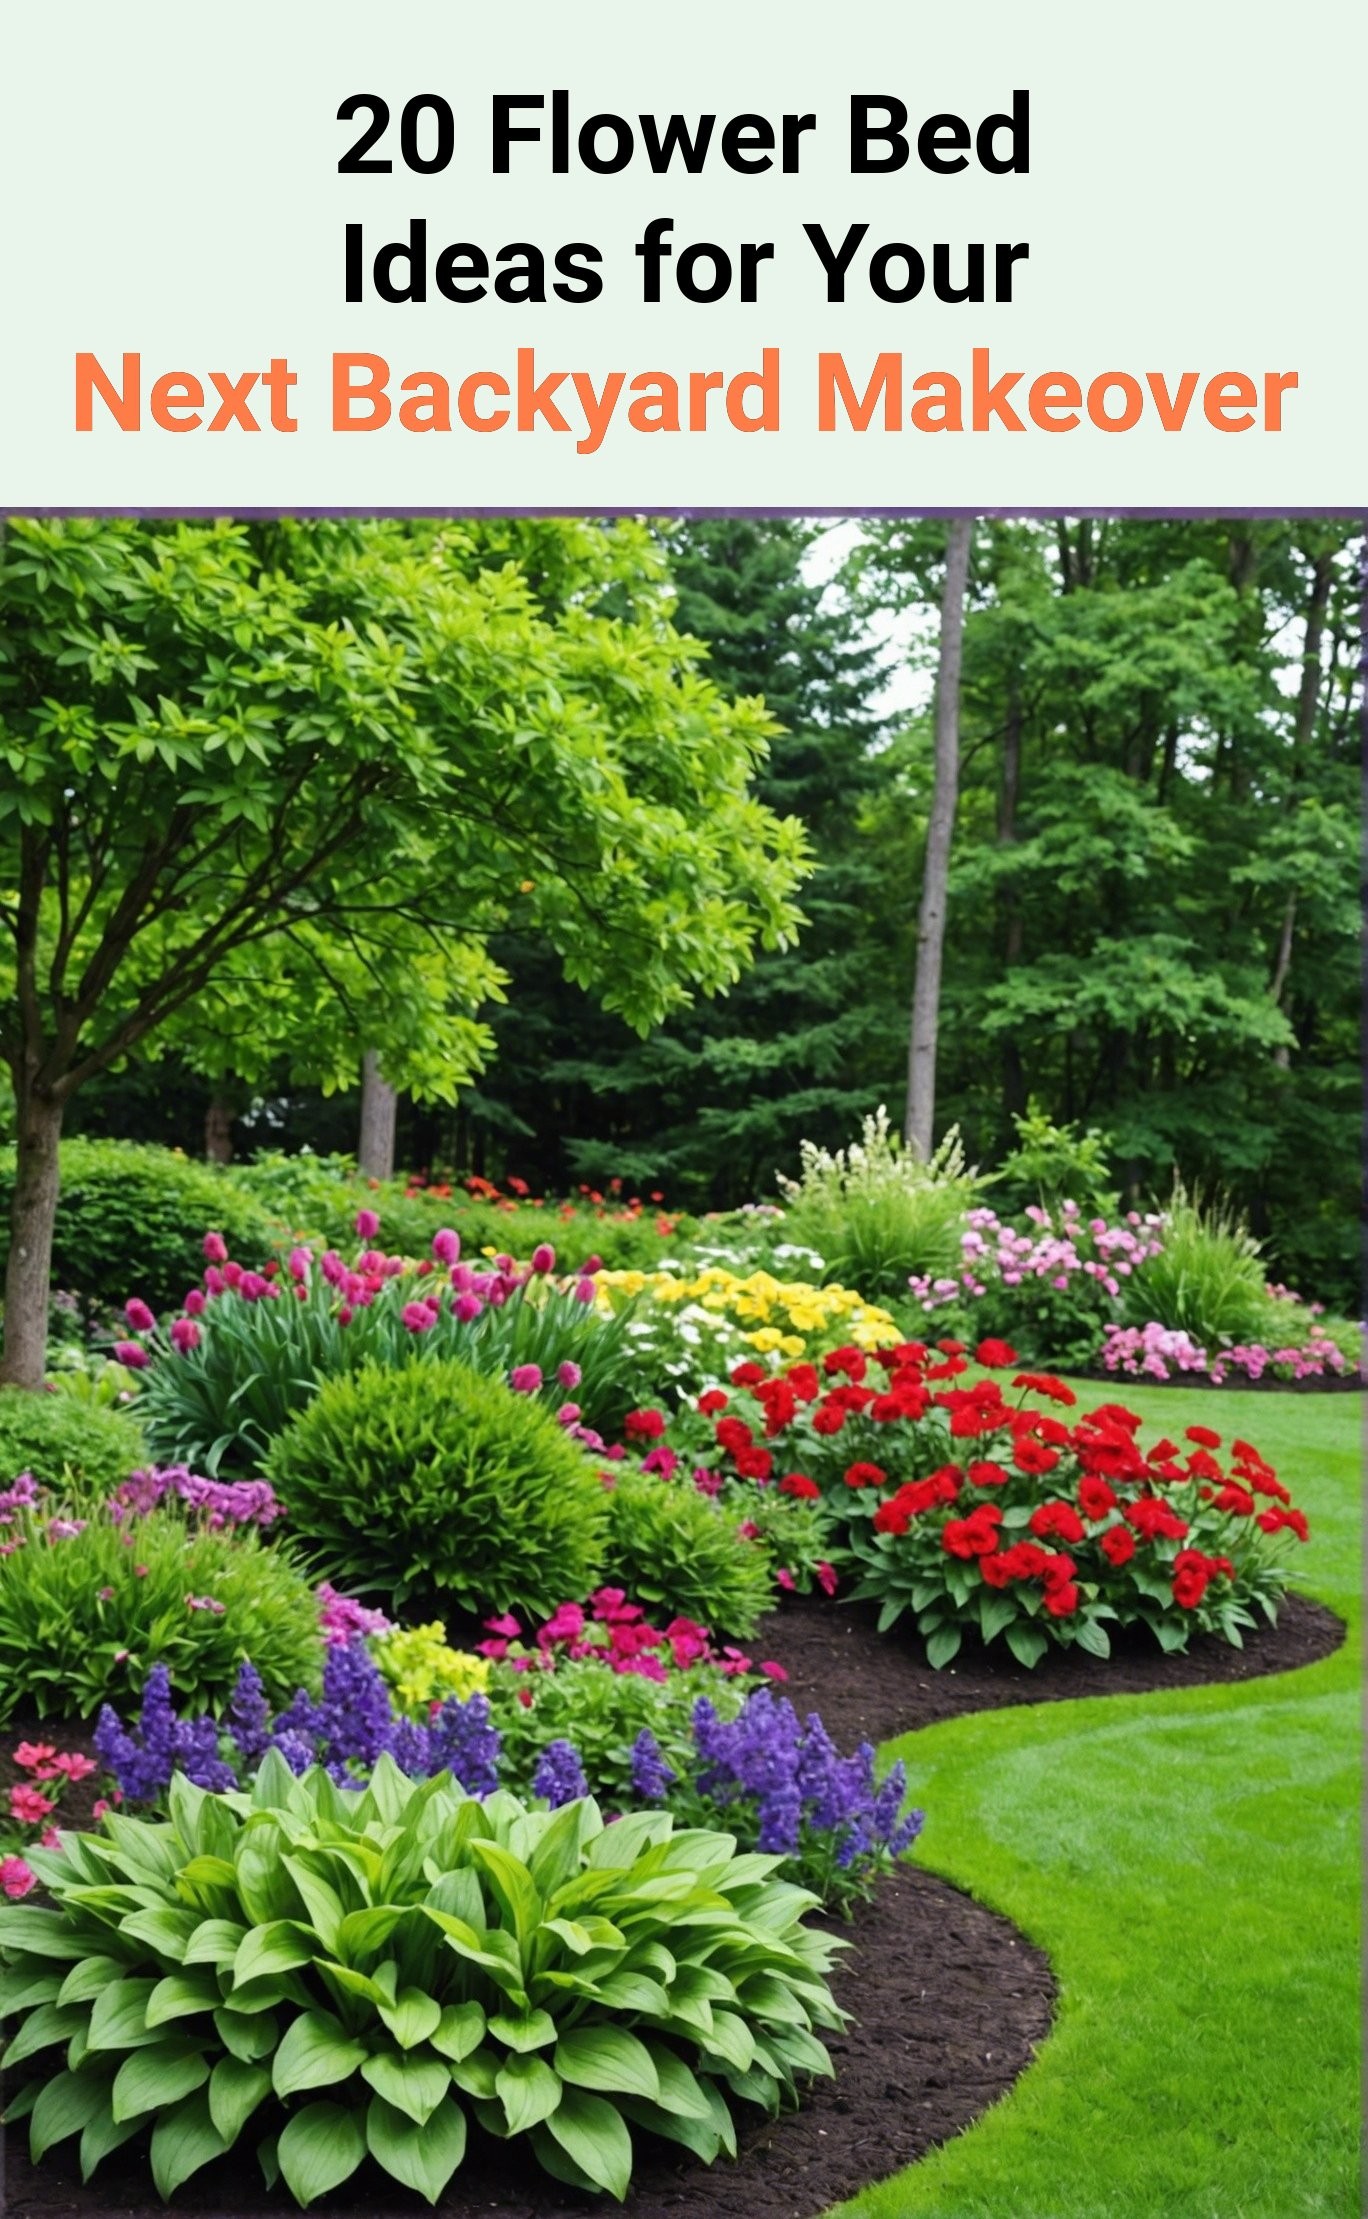 20 Flower Bed Ideas for Your Next Backyard Makeover